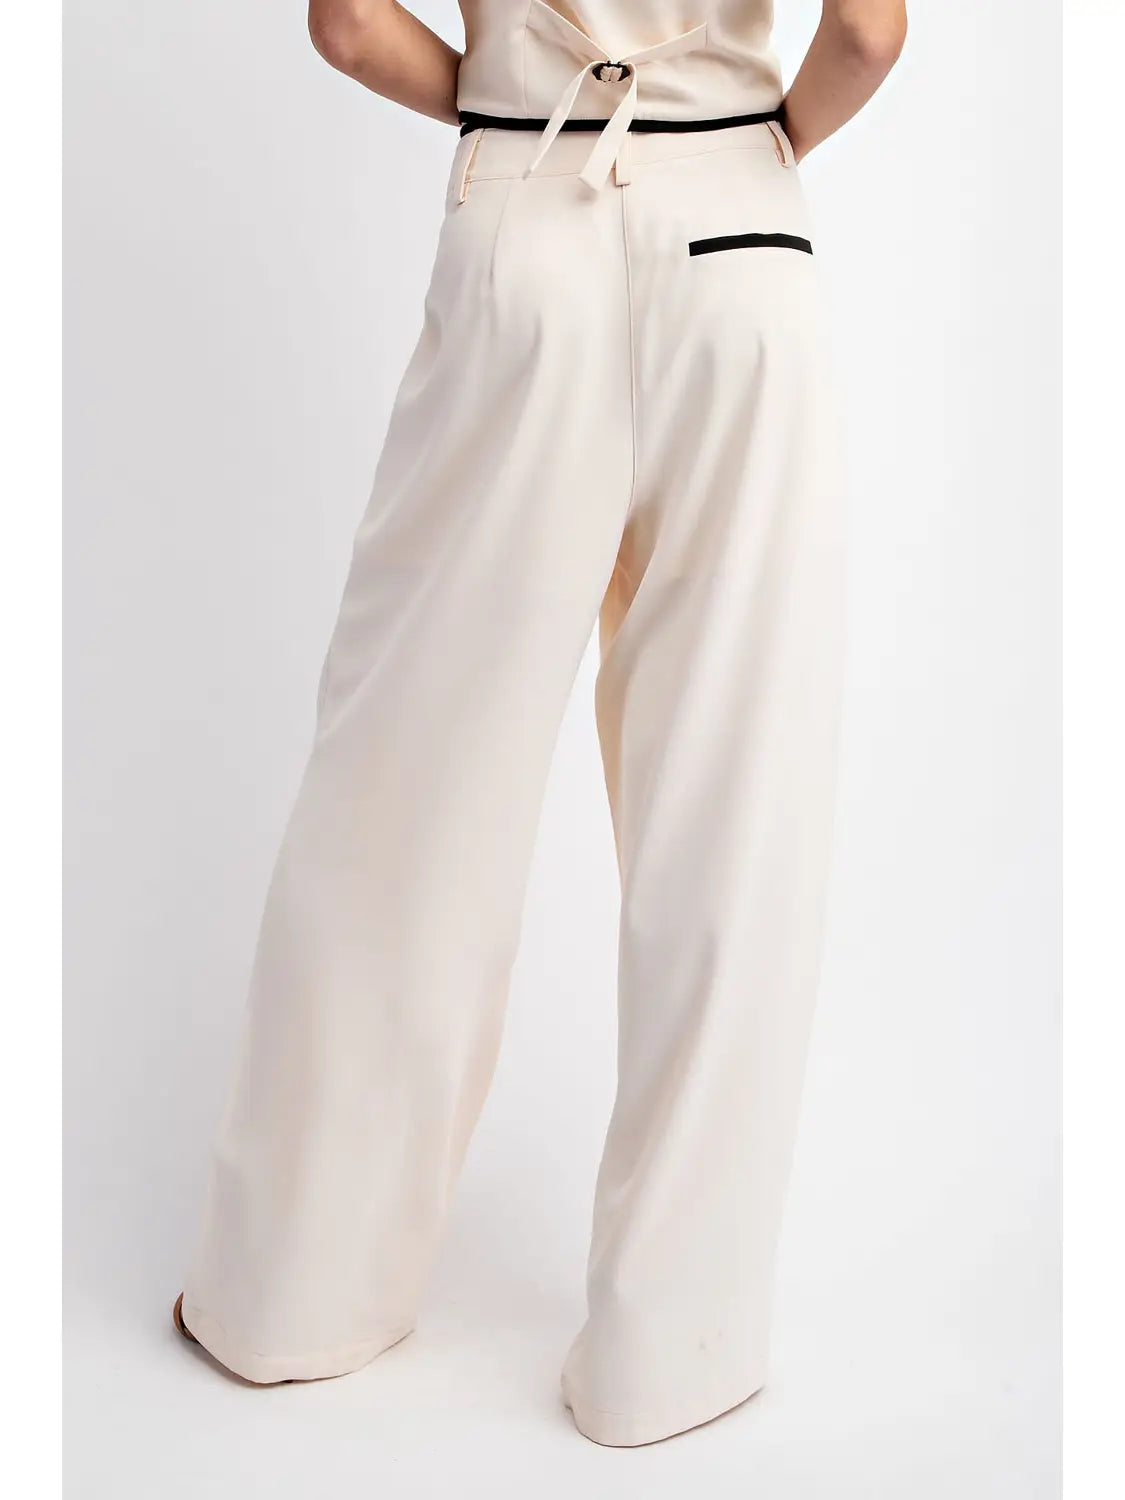 Long Woven Pants With Contrast Edge, Pants by Edit By Nine | LIT Boutique